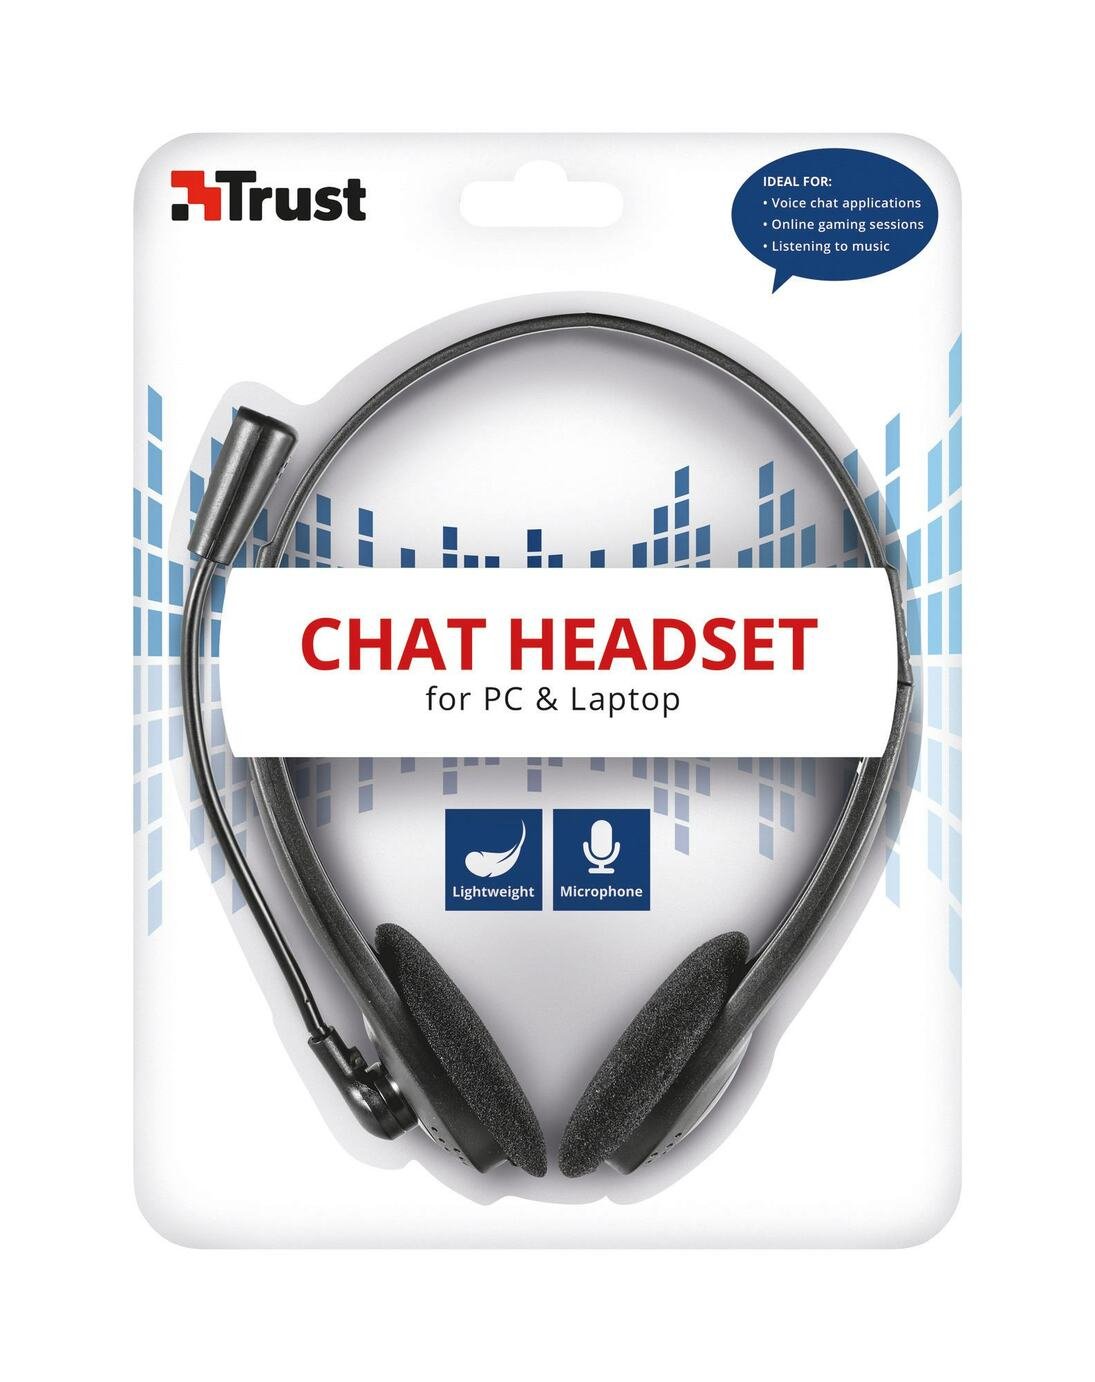 Trust Action Chat Headset Review